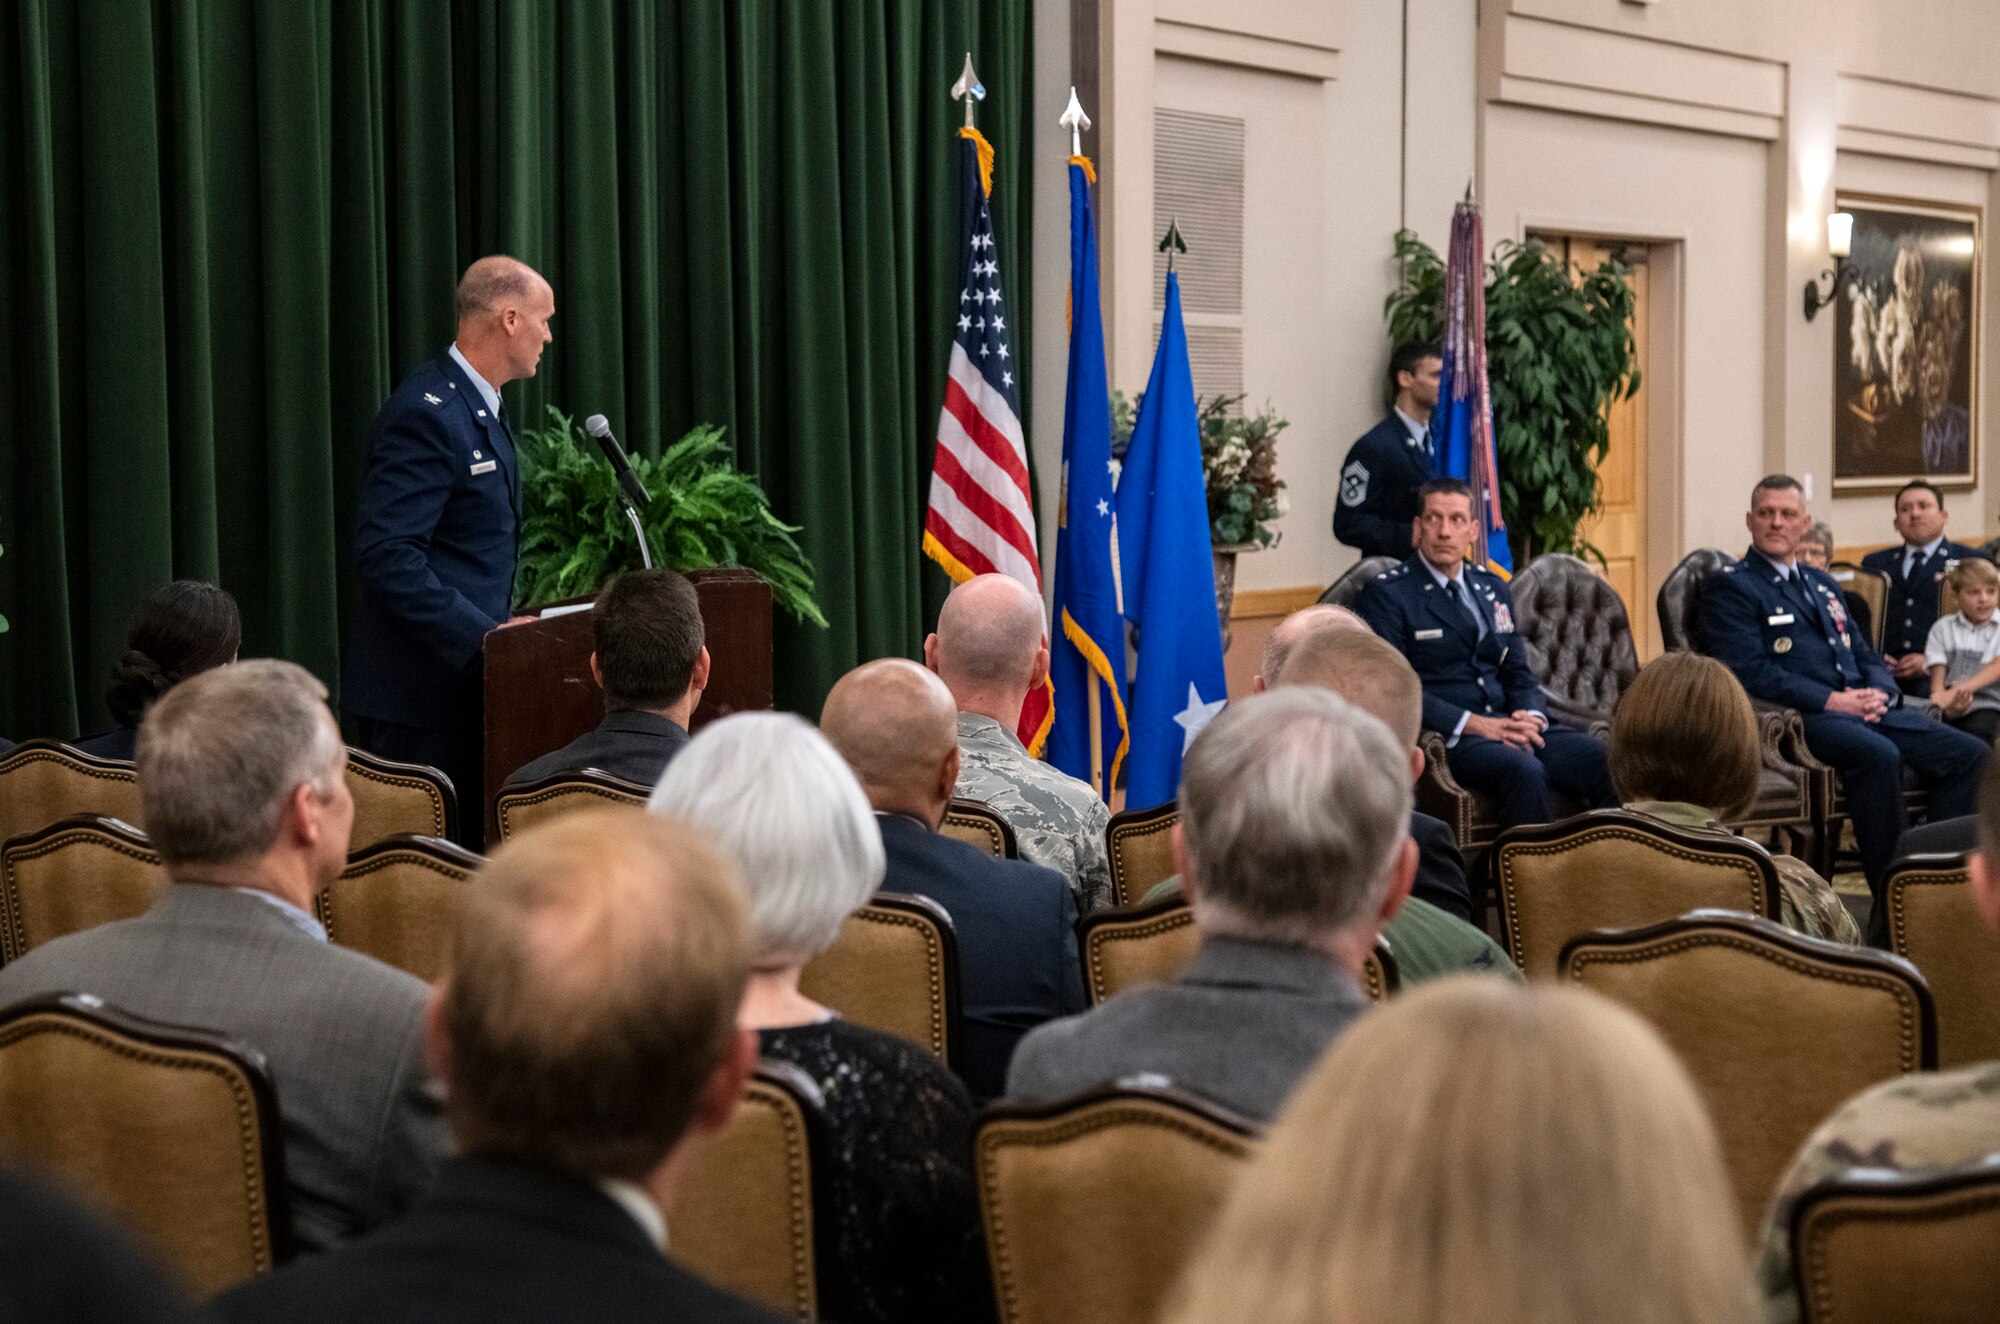 Col. Steven Anderson speaks to attendees after accepting command of the 688th Cyberspace Wing during the wing’s change of command ceremony at Joint Base San Antonio-Lackland, Texas, on June 25, 2019. Col. Eric DeLange relinquished command of the 688th CW during the ceremony. (U.S. Air Force photo by Johnny Saldivar)